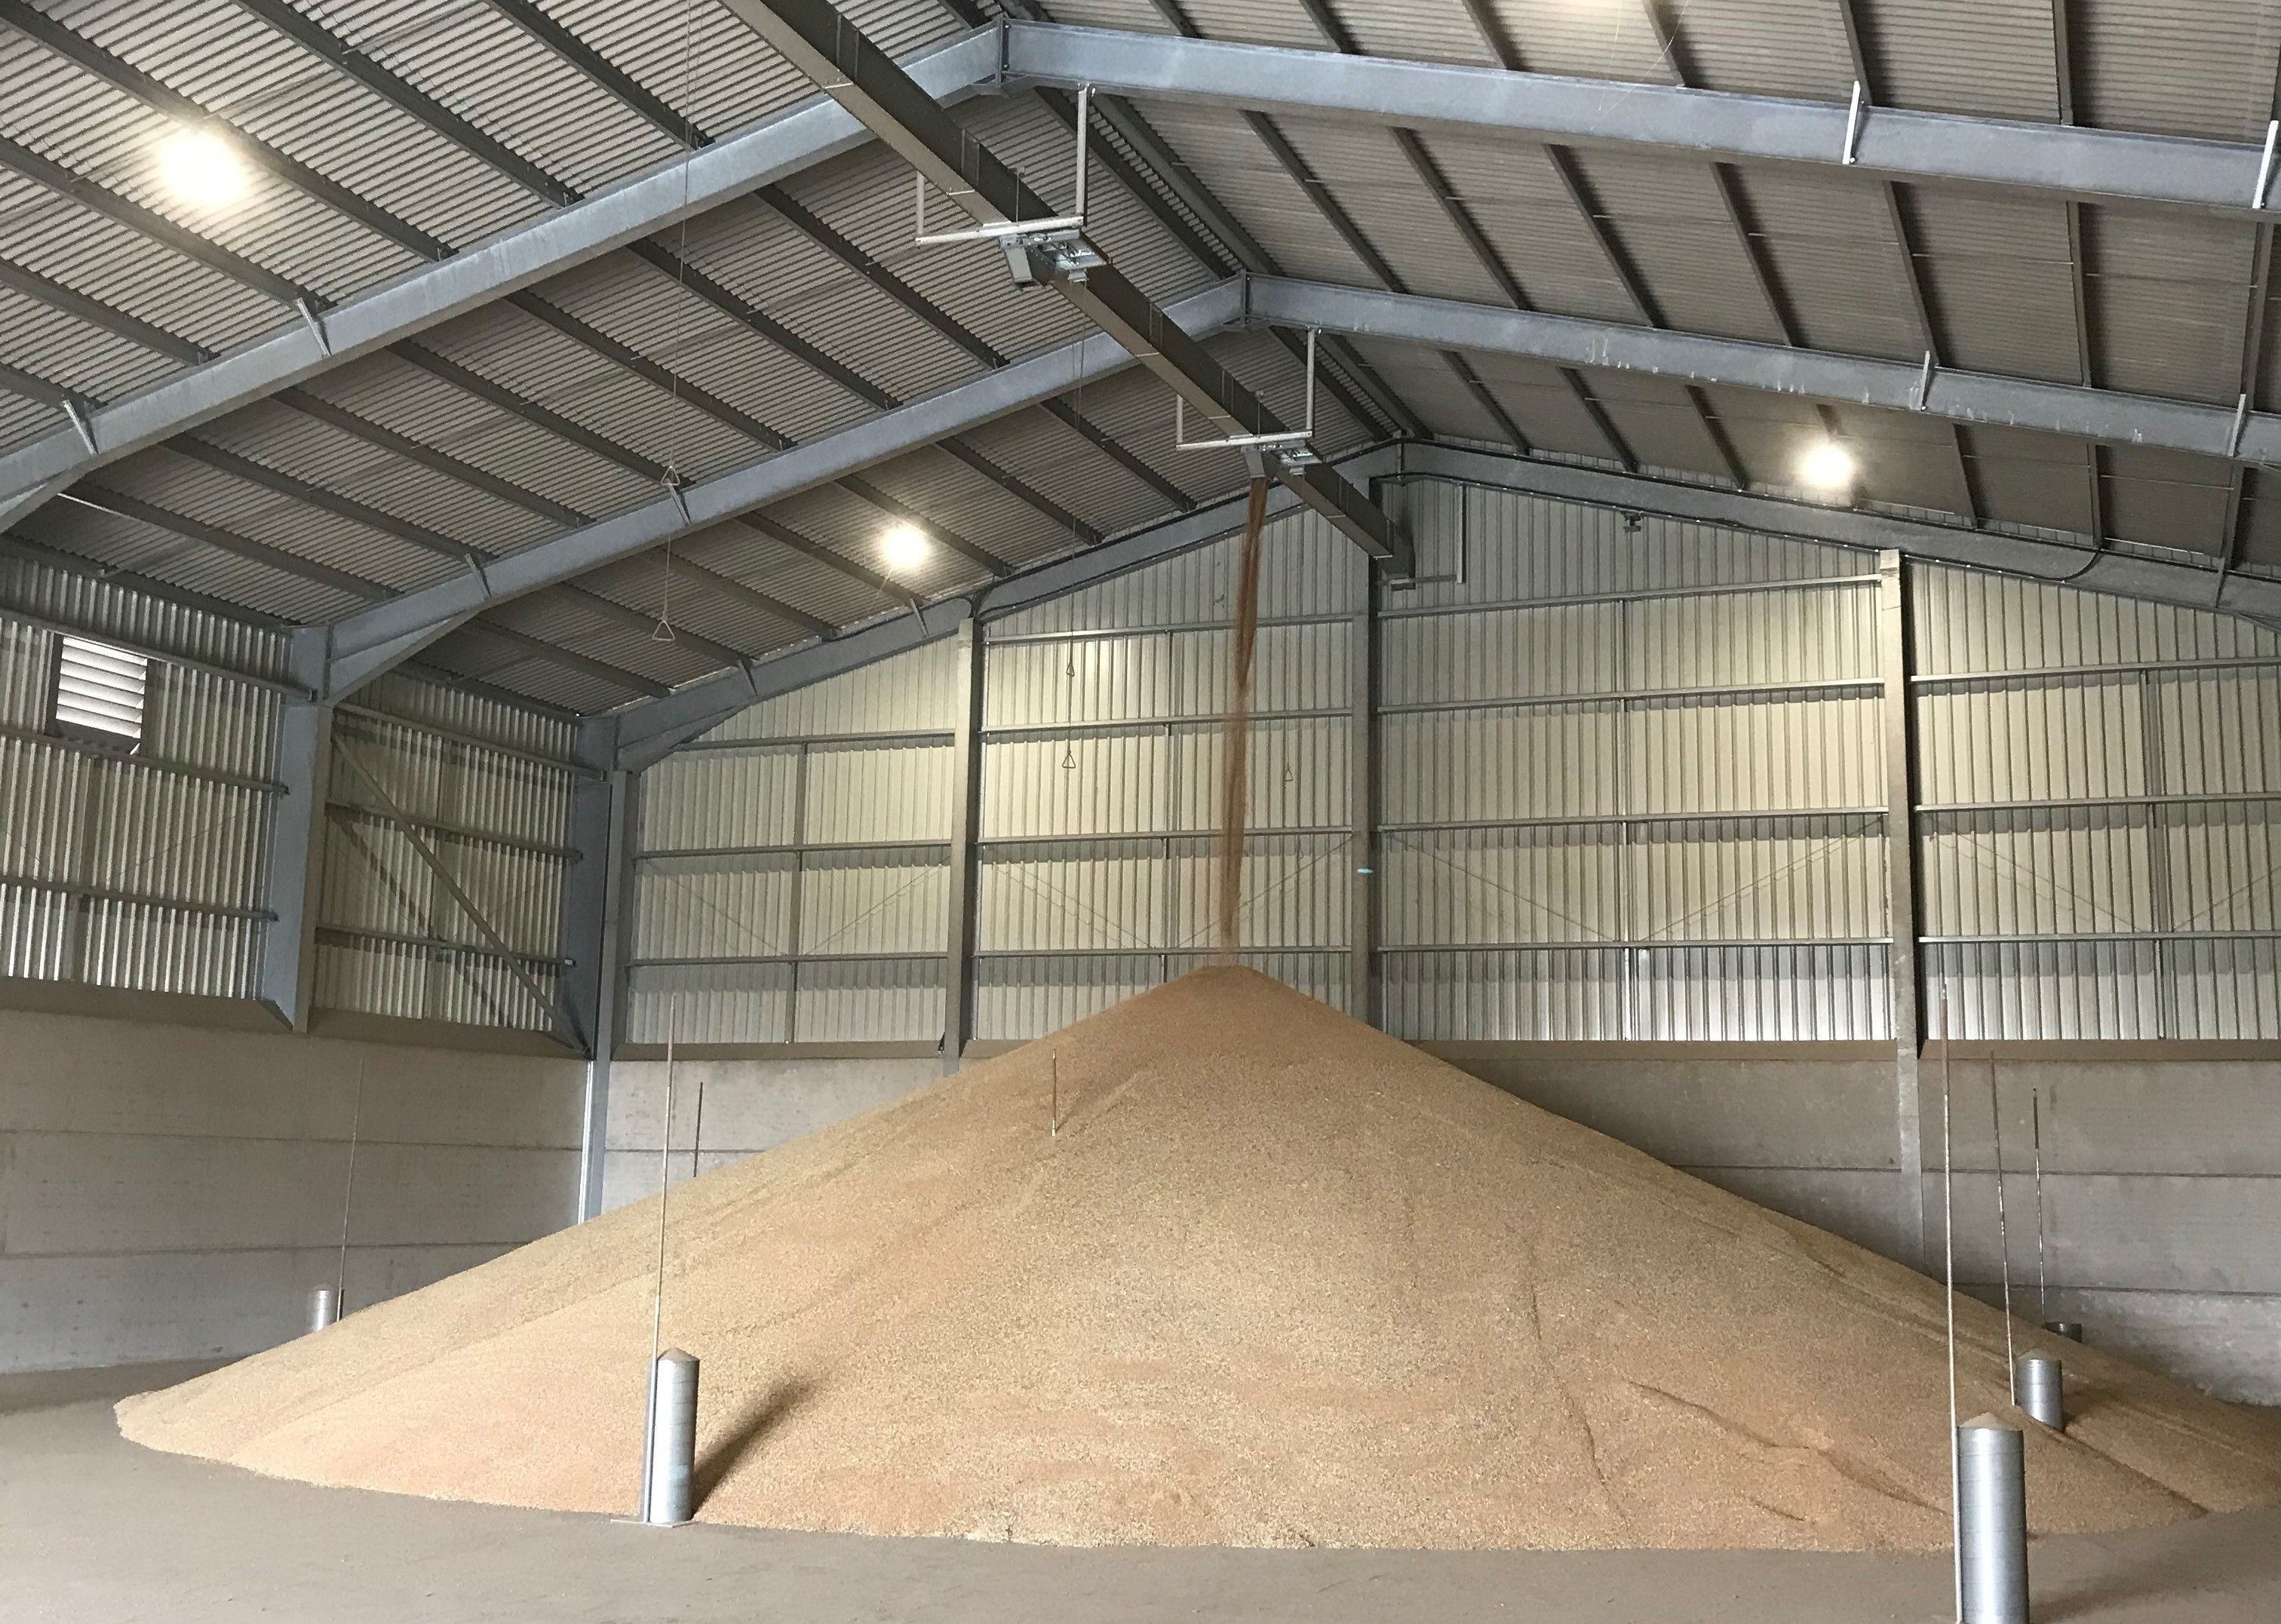 Huddlestone Produce takes advantage of change in planning regulations when upgrading grain drying and storage plant and speeds up harvest